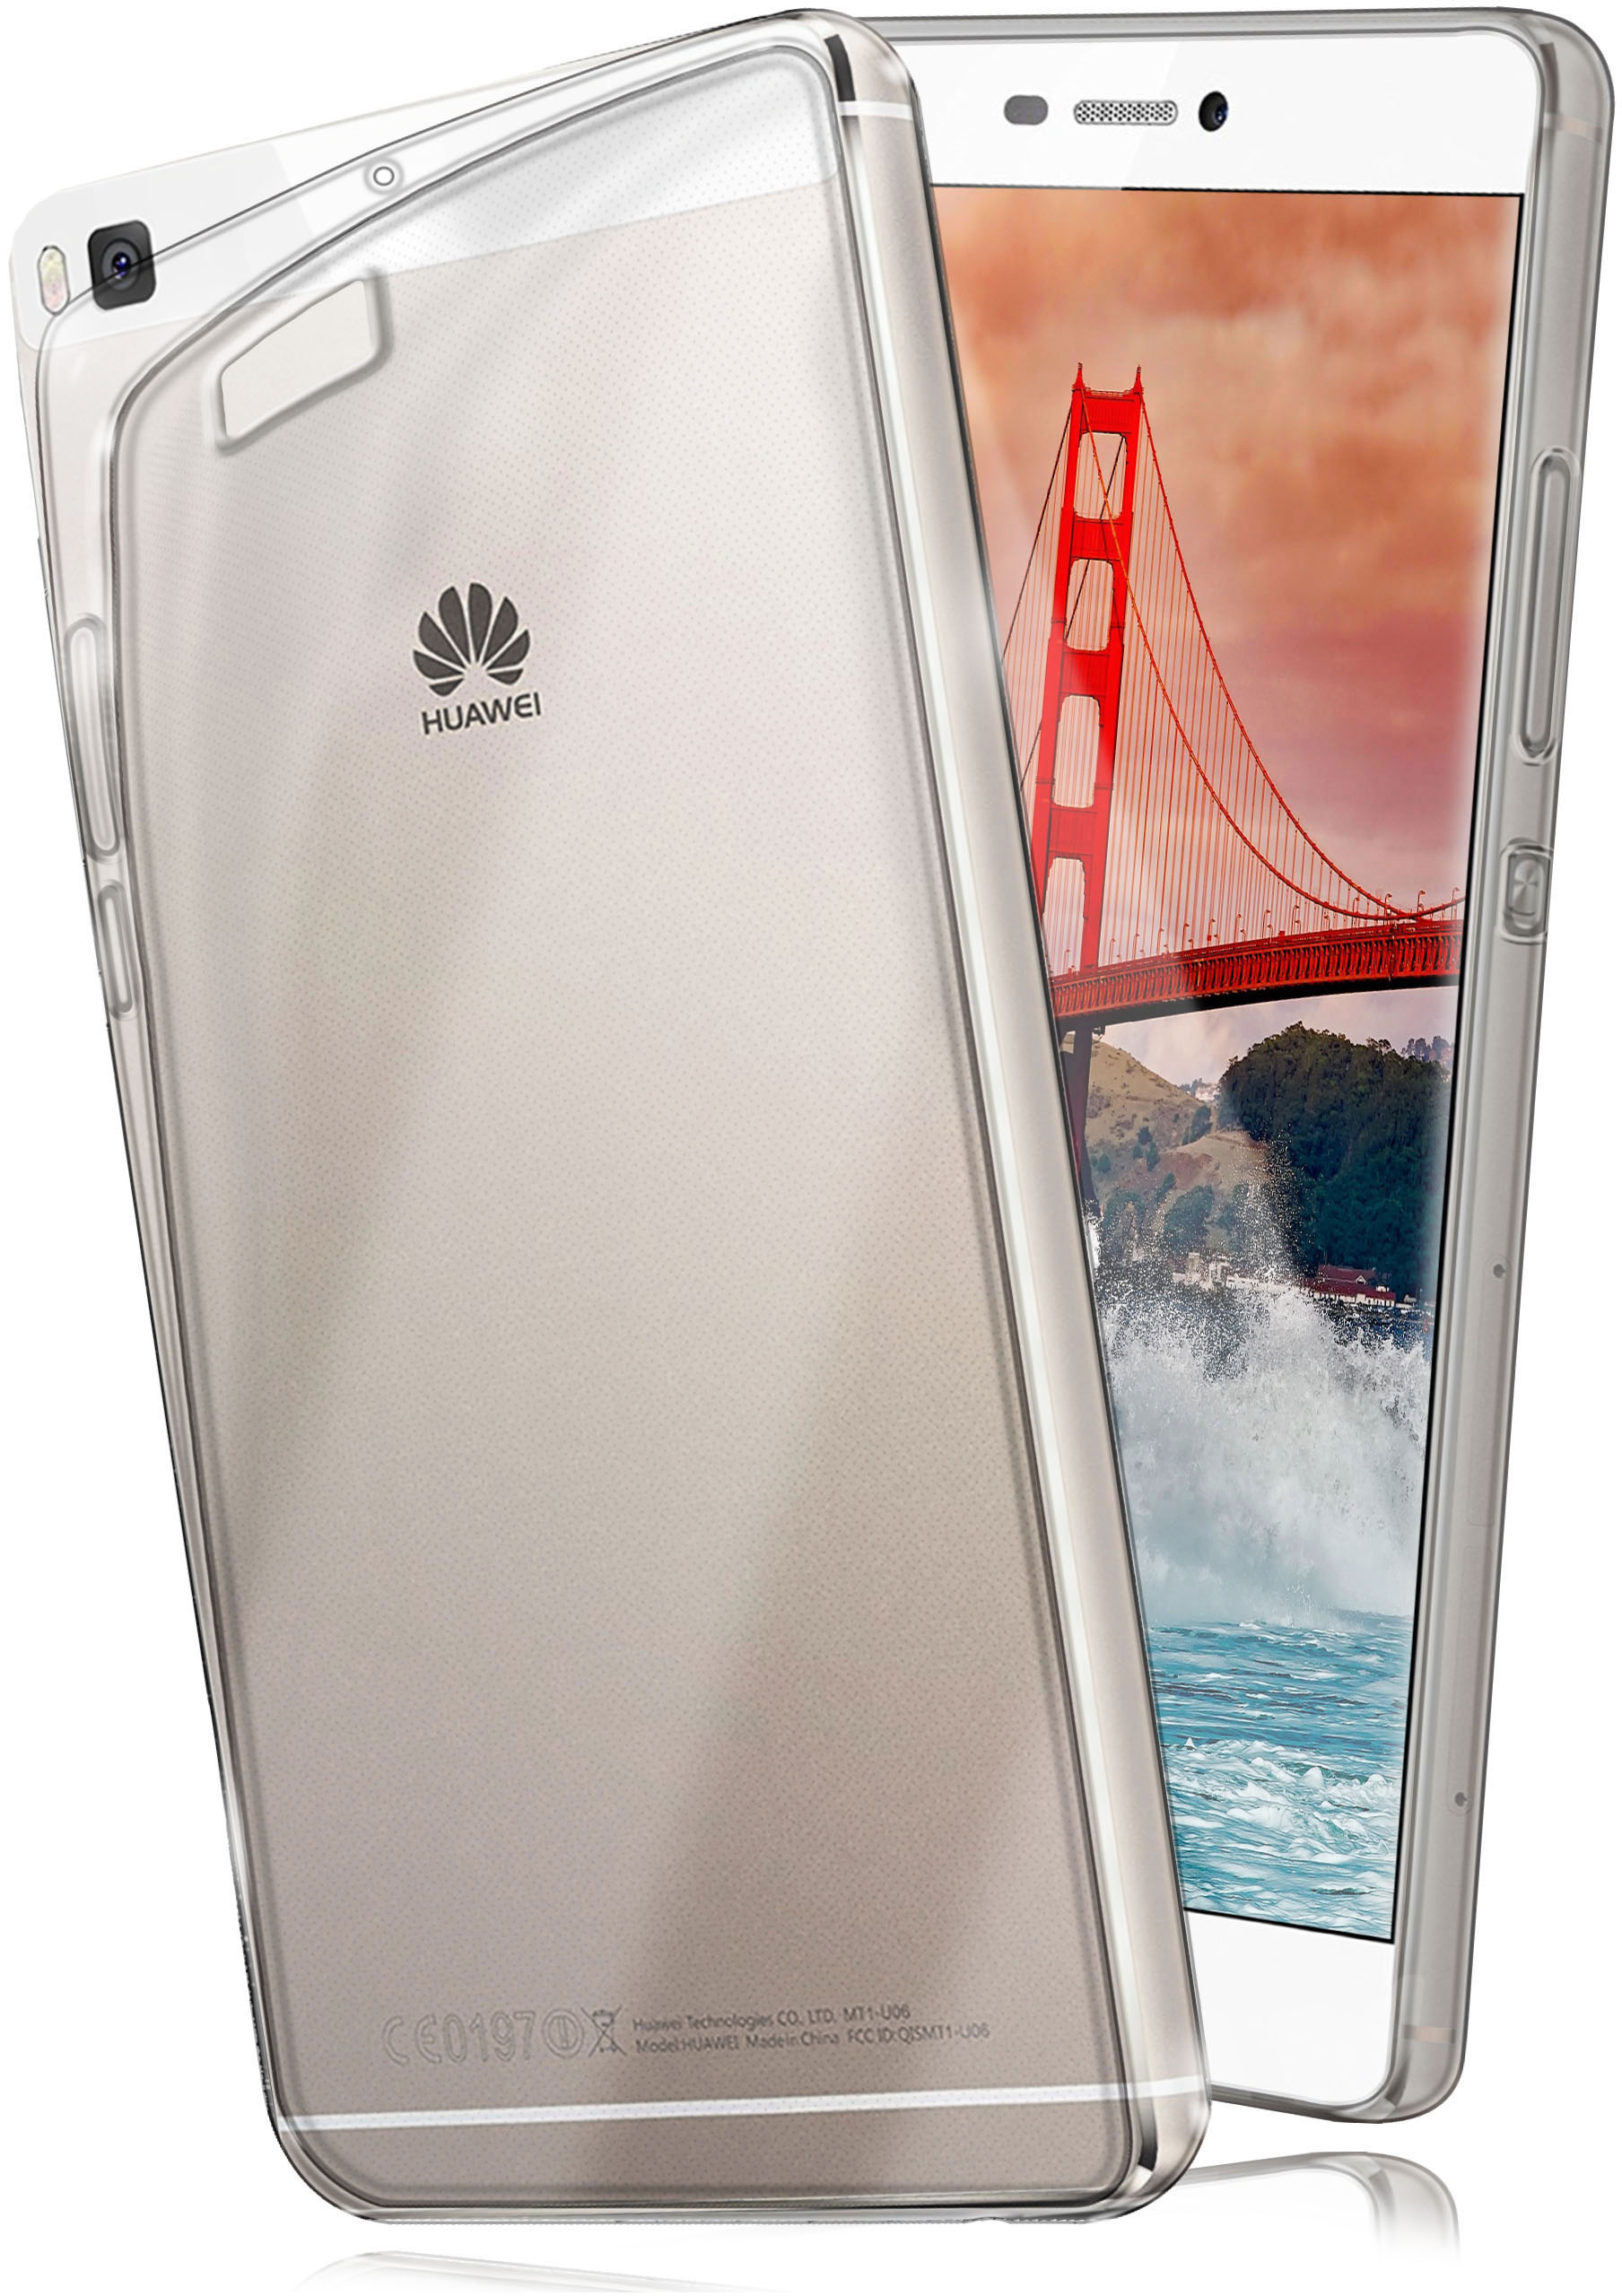 Backcover, P8, MOEX Crystal-Clear Case, Huawei, Aero